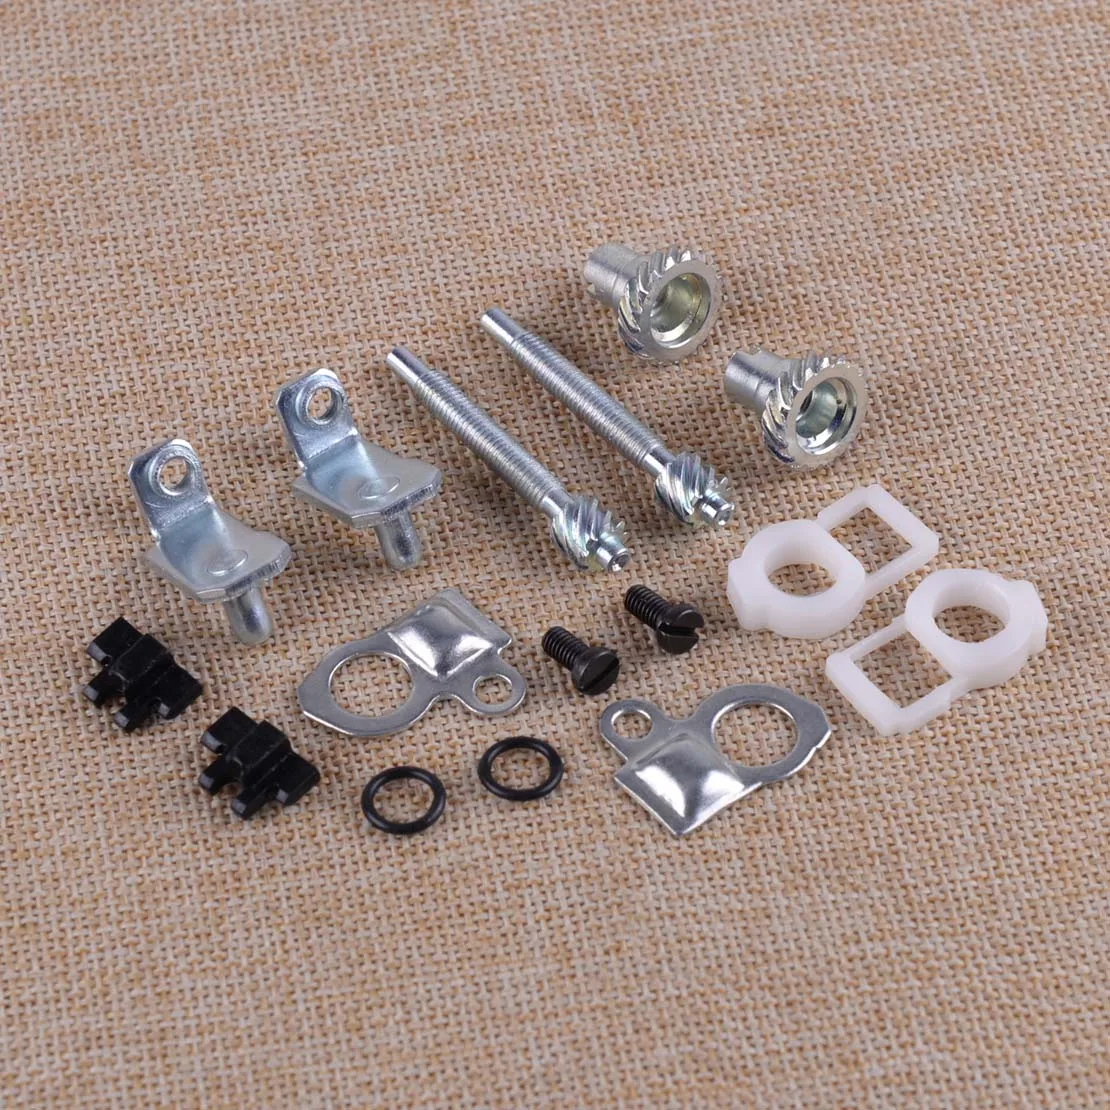 

LETAOSK New 2 Kit Chain Adjuster Tensioner Kit Fit for Stihl MS261 MS280 MS341 MS441 038 MS461